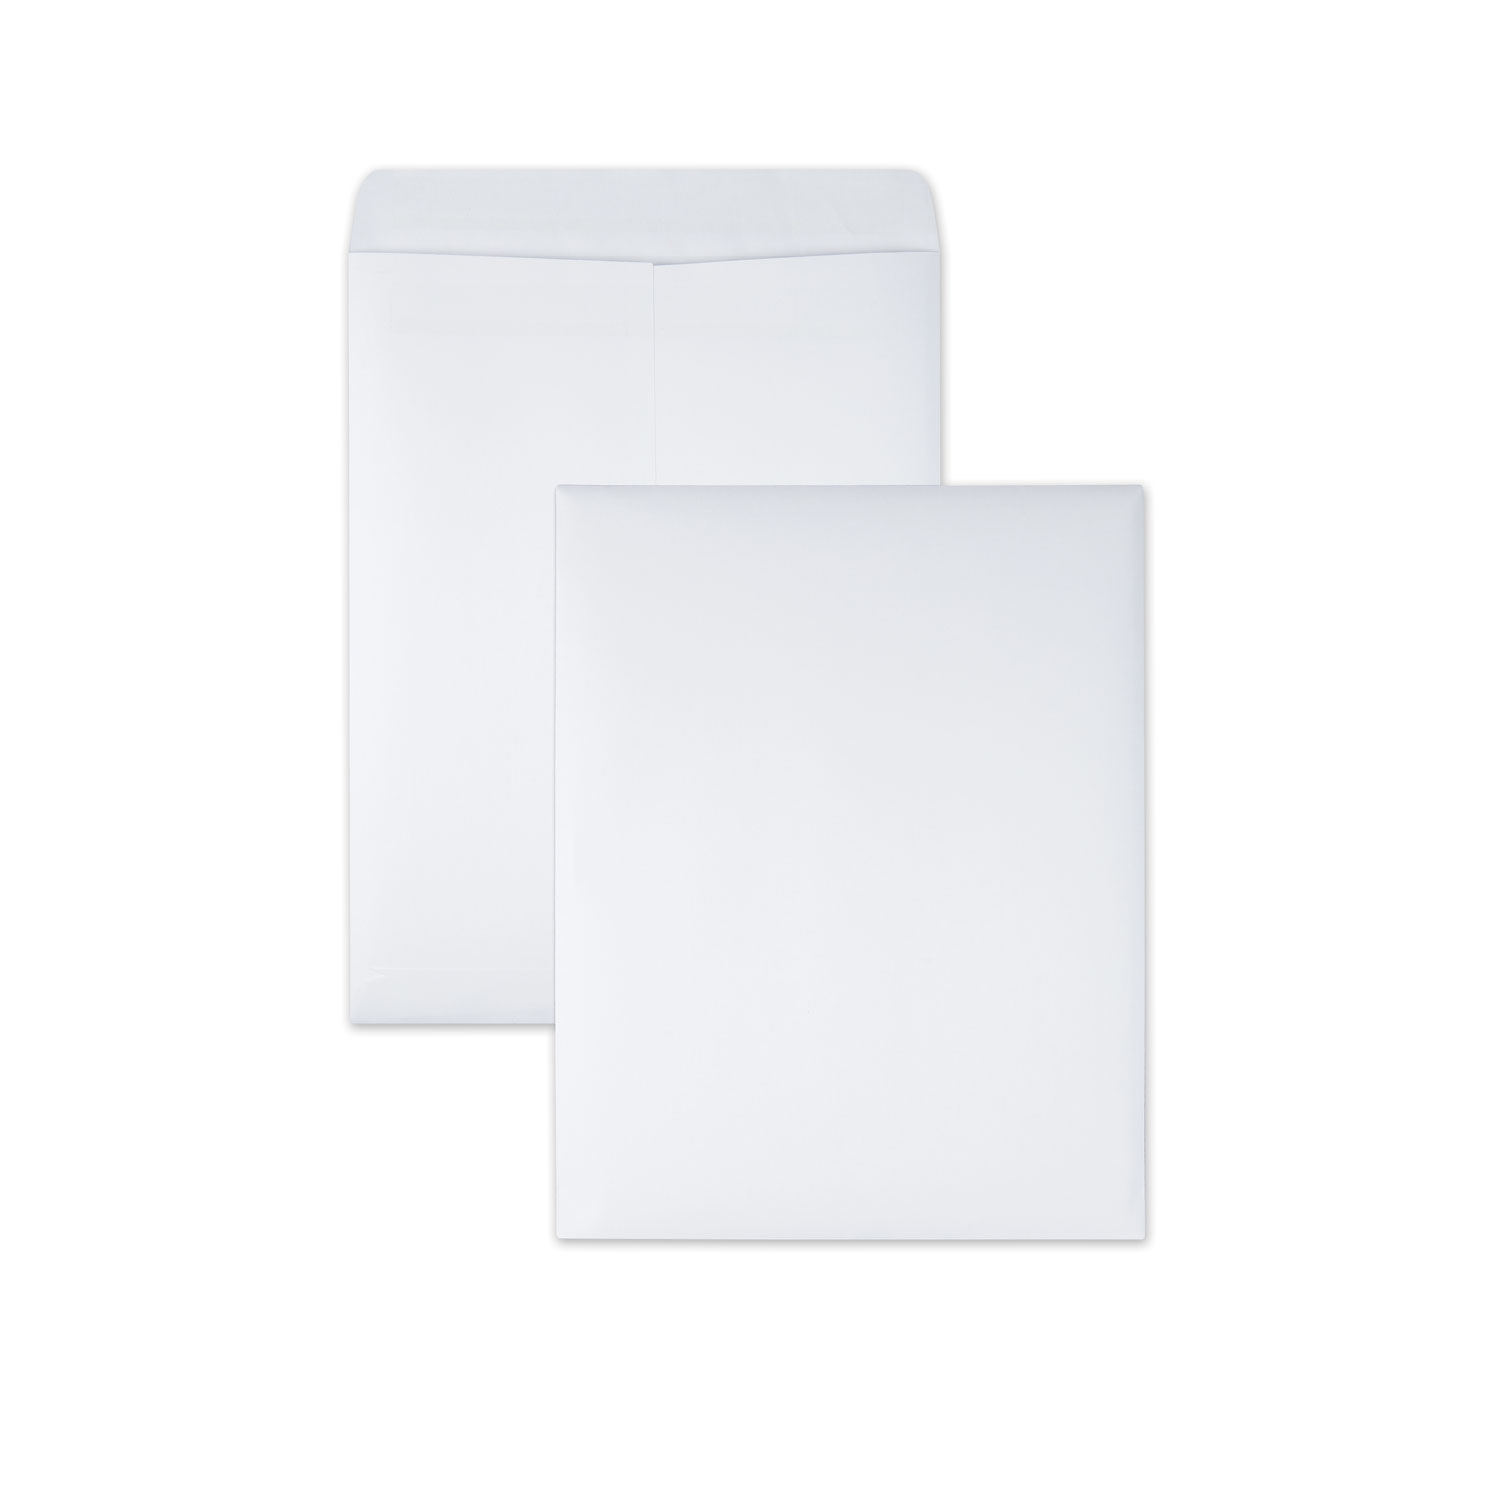 Quality Park Self-Seal Envelope Moistener With Adhesive, 2-Pack